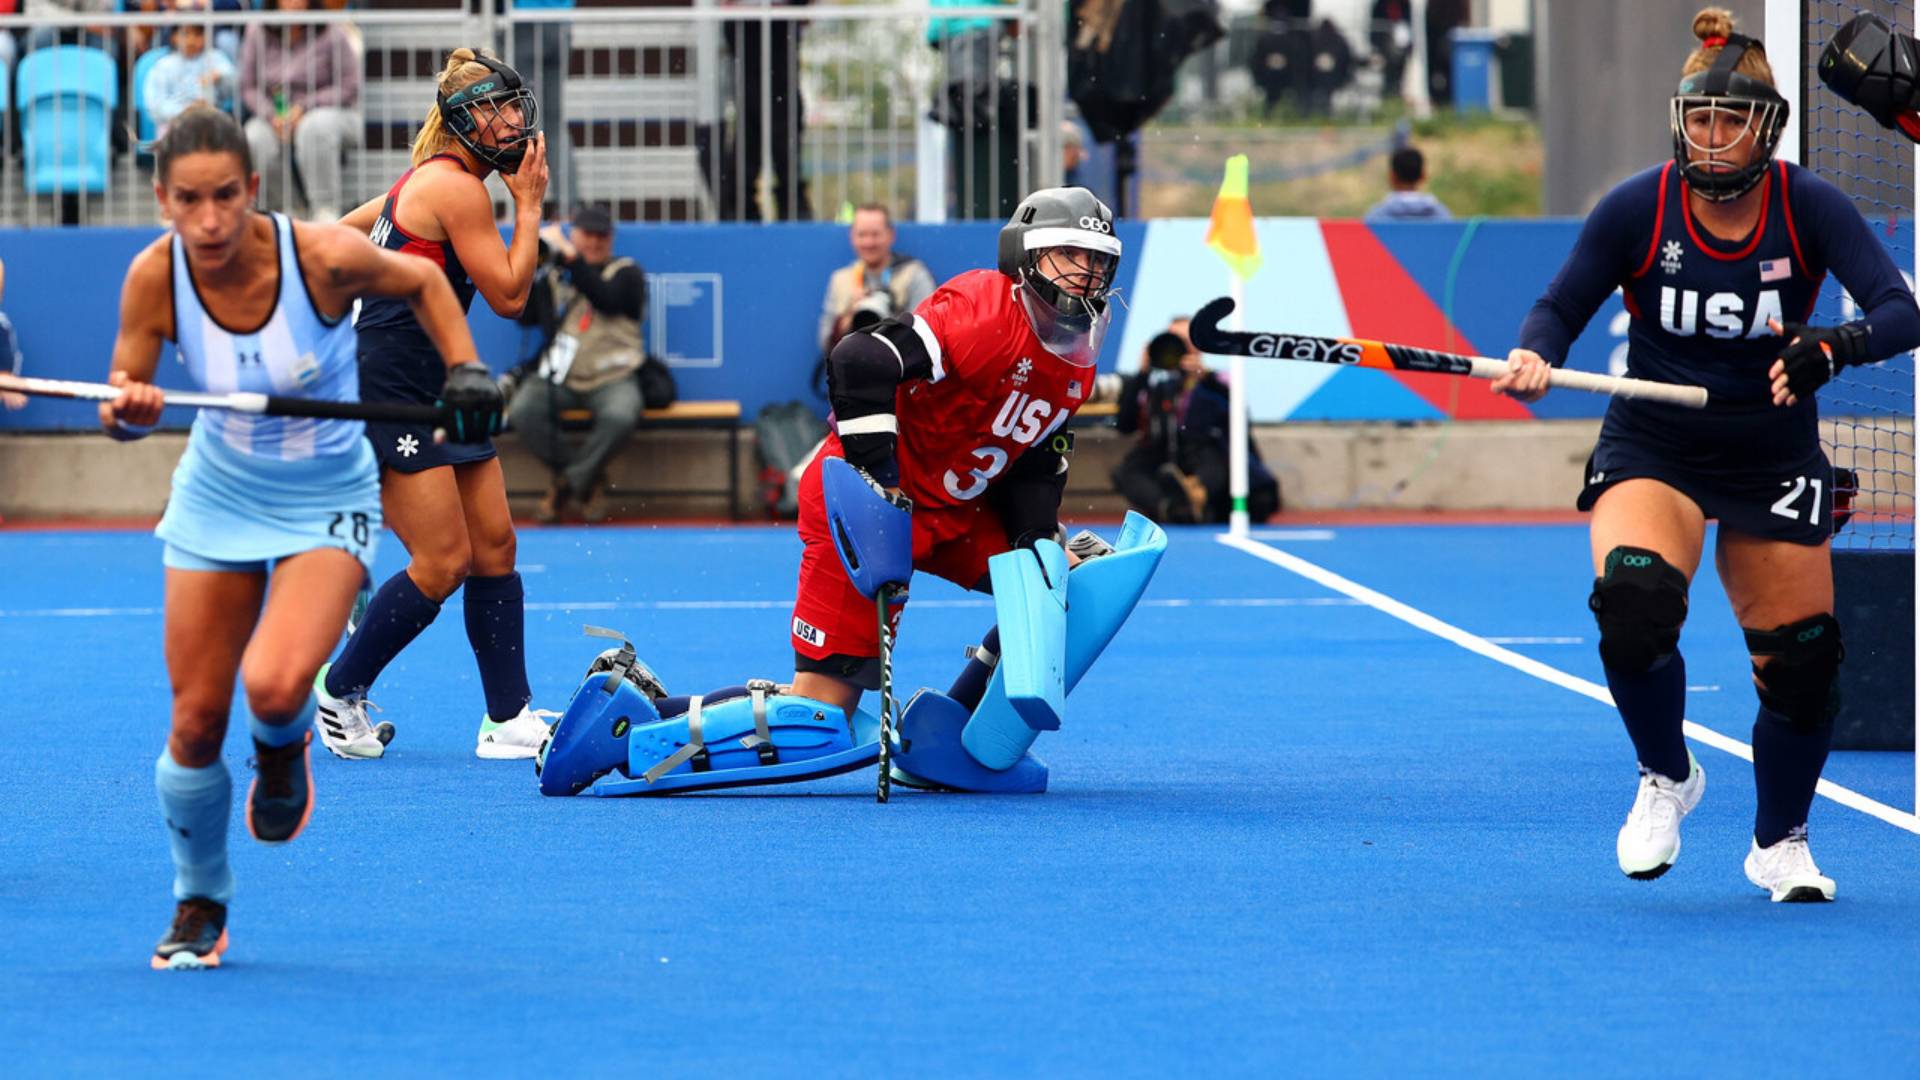 Argentina advances to the field hockey semifinals